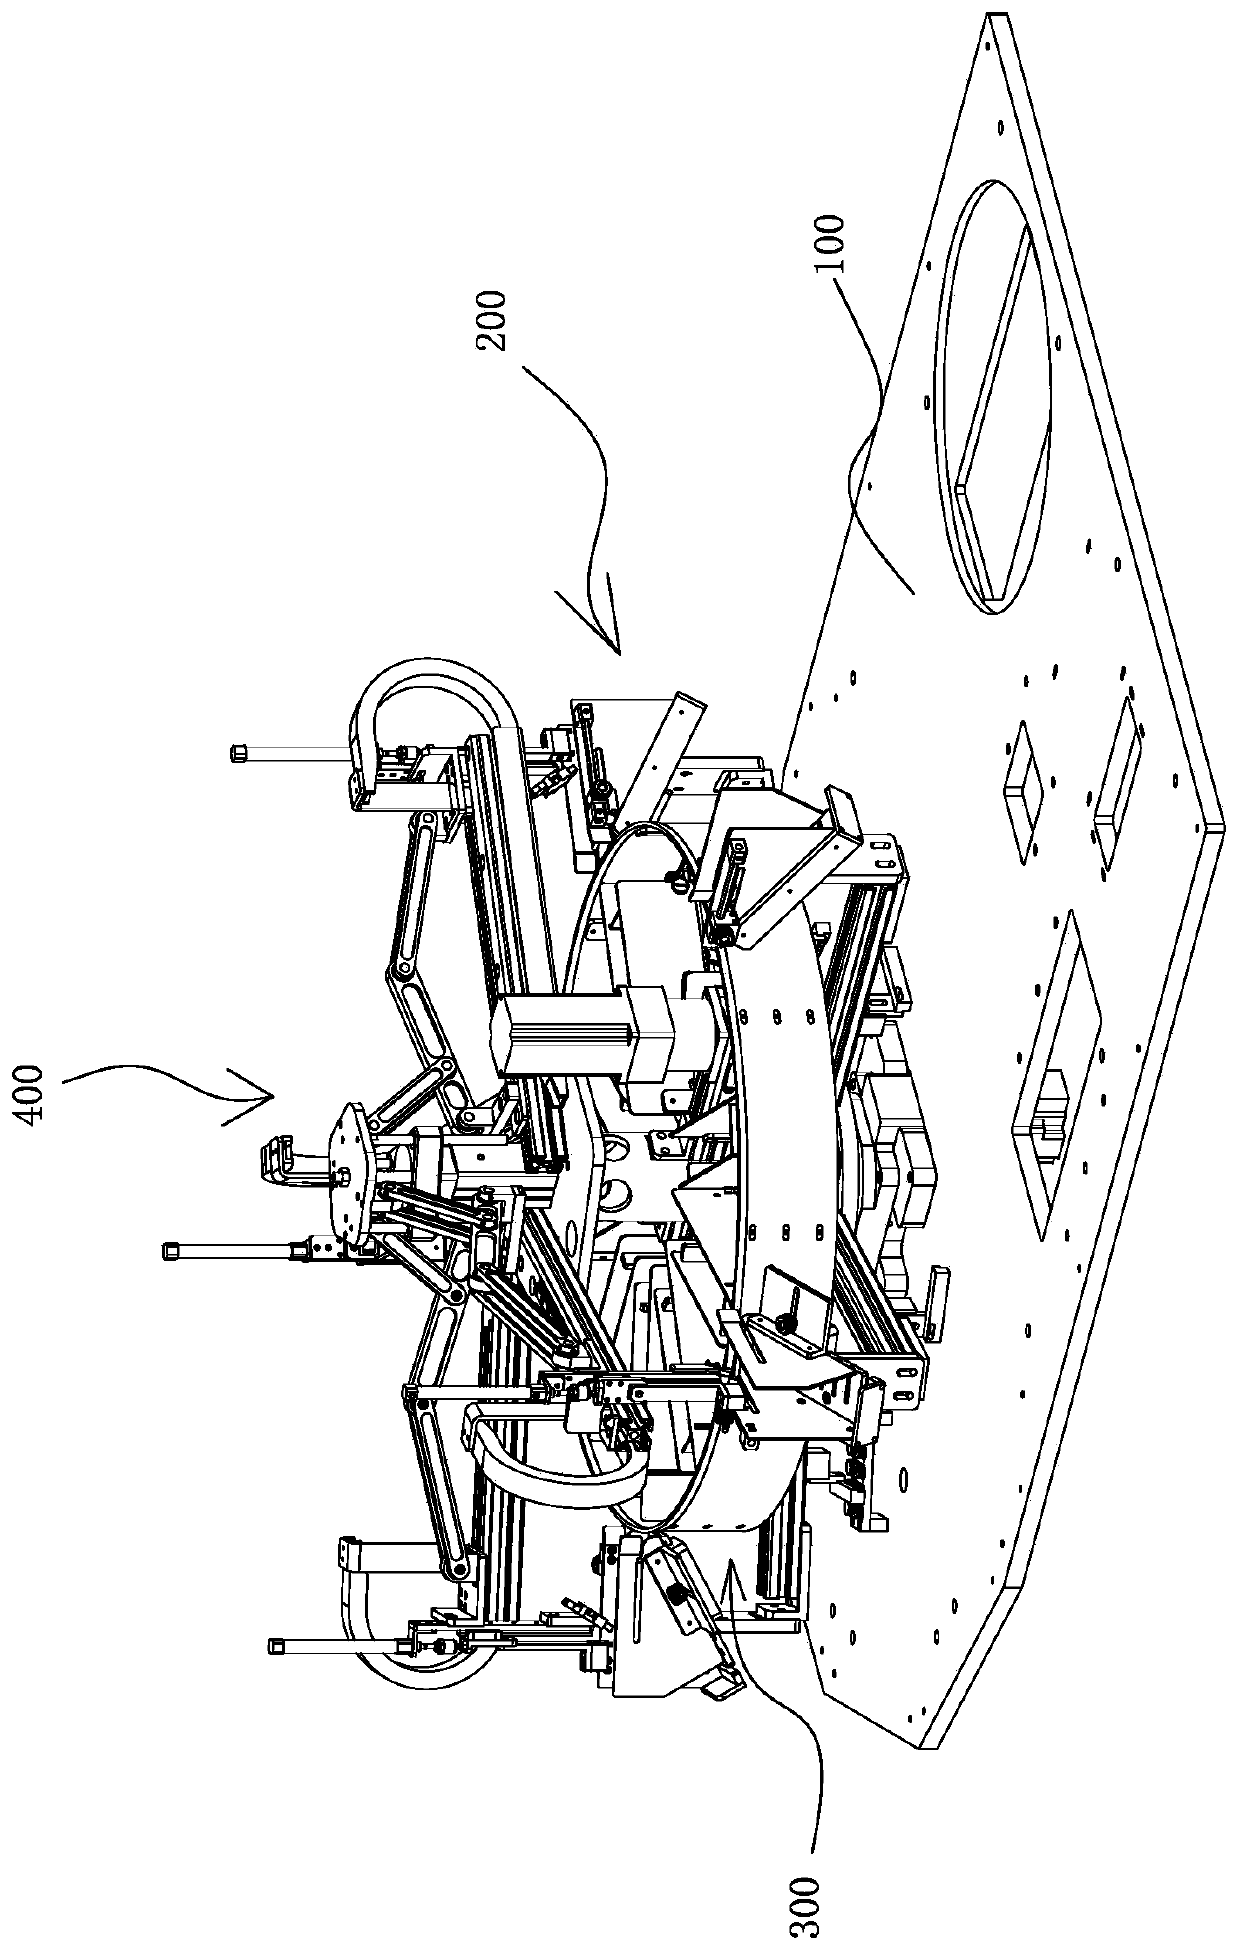 Material taking device of full-automatic sewn-in label machine